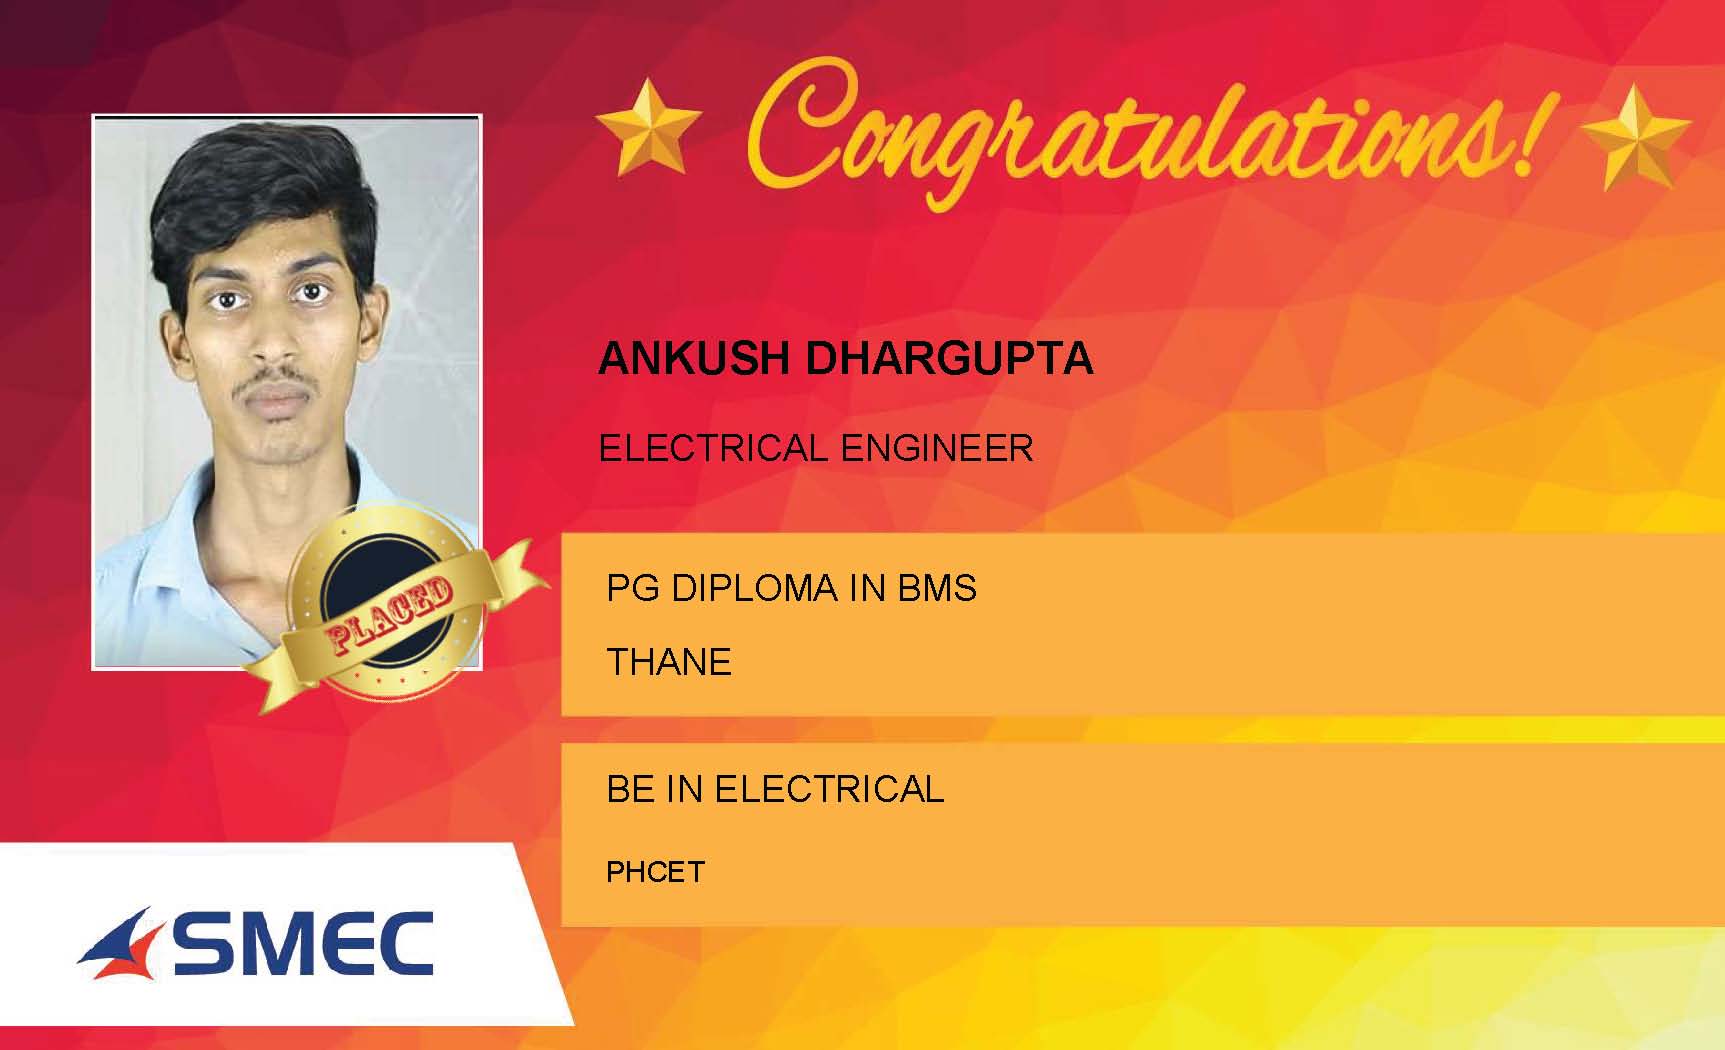 Ankush Dhargupta Placed Successfully Electrical Engineer